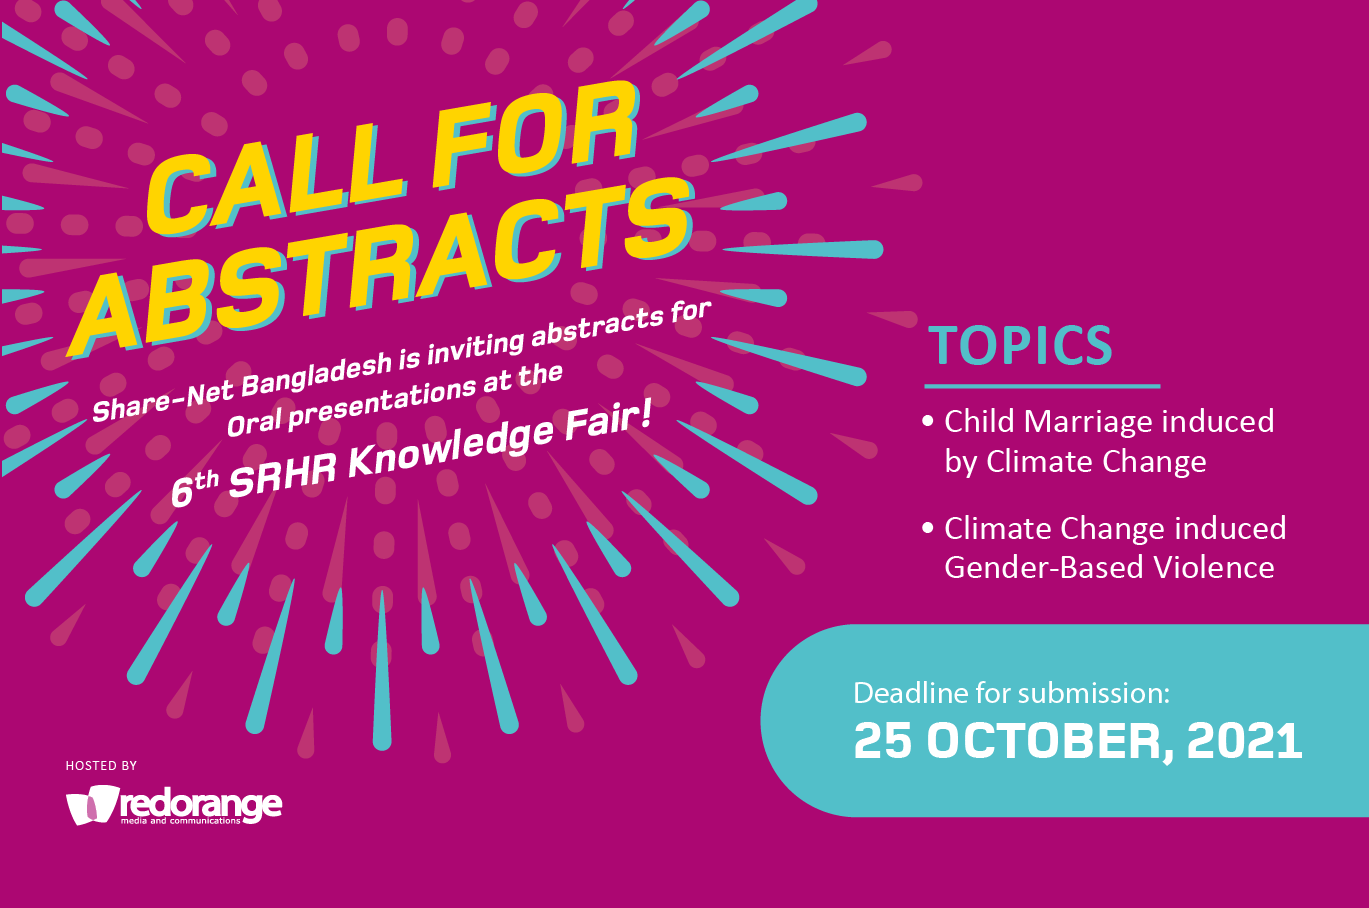 Call for Abstracts – The Share-Net Bangladesh SRHR Knowledge Fair 2021